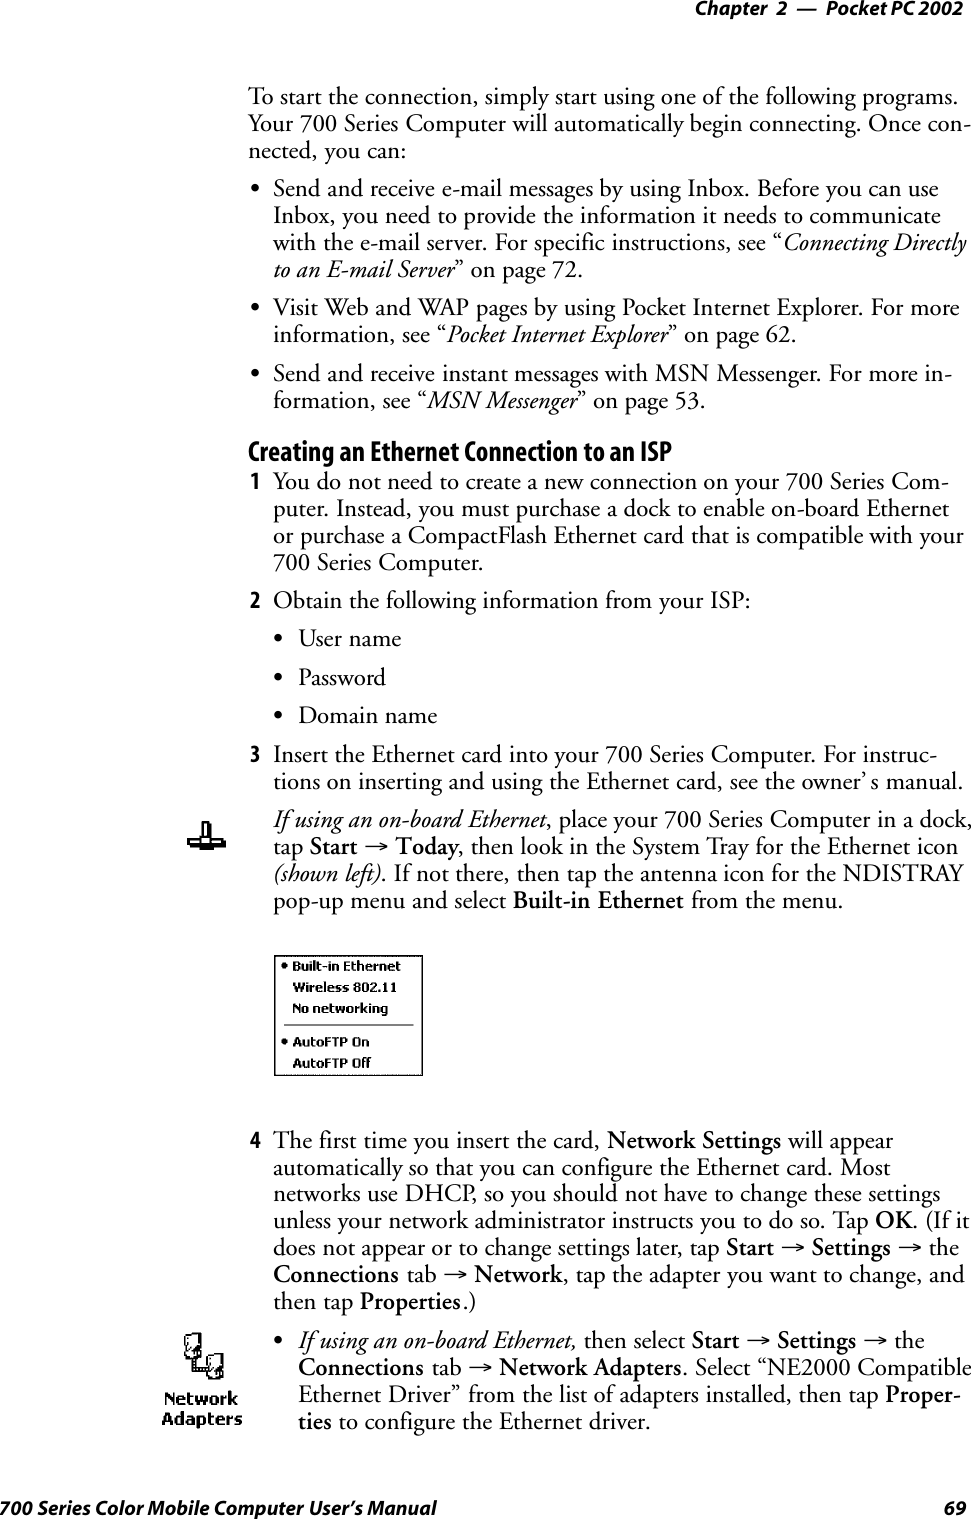 Pocket PC 2002—Chapter 269700 Series Color Mobile Computer User’s ManualTo start the connection, simply start using one of the following programs.Your 700 Series Computer will automatically begin connecting. Once con-nected, you can:SSend and receive e-mail messages by using Inbox. Before you can useInbox, you need to provide the information it needs to communicatewith the e-mail server. For specific instructions, see “Connecting Directlyto an E-mail Server” on page 72.SVisit Web and WAP pages by using Pocket Internet Explorer. For moreinformation, see “Pocket Internet Explorer” on page 62.SSend and receive instant messages with MSN Messenger. For more in-formation, see “MSN Messenger” on page 53.Creating an Ethernet Connection to an ISP1You do not need to create a new connection on your 700 Series Com-puter. Instead, you must purchase a dock to enable on-board Ethernetor purchase a CompactFlash Ethernet card that is compatible with your700 Series Computer.2Obtain the following information from your ISP:SUser nameSPasswordSDomain name3Insert the Ethernet card into your 700 Series Computer. For instruc-tions on inserting and using the Ethernet card, see the owner’ s manual.If using an on-board Ethernet, place your 700 Series Computer in a dock,tap Start →Today, then look in the System Tray for the Ethernet icon(shown left). If not there, then tap the antenna icon for the NDISTRAYpop-up menu and select Built-in Ethernet from the menu.4The first time you insert the card, Network Settings will appearautomatically so that you can configure the Ethernet card. Mostnetworks use DHCP, so you should not have to change these settingsunless your network administrator instructs you to do so. Tap OK.(Ifitdoes not appear or to change settings later, tap Start →Settings →theConnections tab →Network, tap the adapter you want to change, andthen tap Properties.)SIf using an on-board Ethernet, then select Start →Settings →theConnections tab →Network Adapters. Select “NE2000 CompatibleEthernet Driver” from the list of adapters installed, then tap Proper-ties to configure the Ethernet driver.